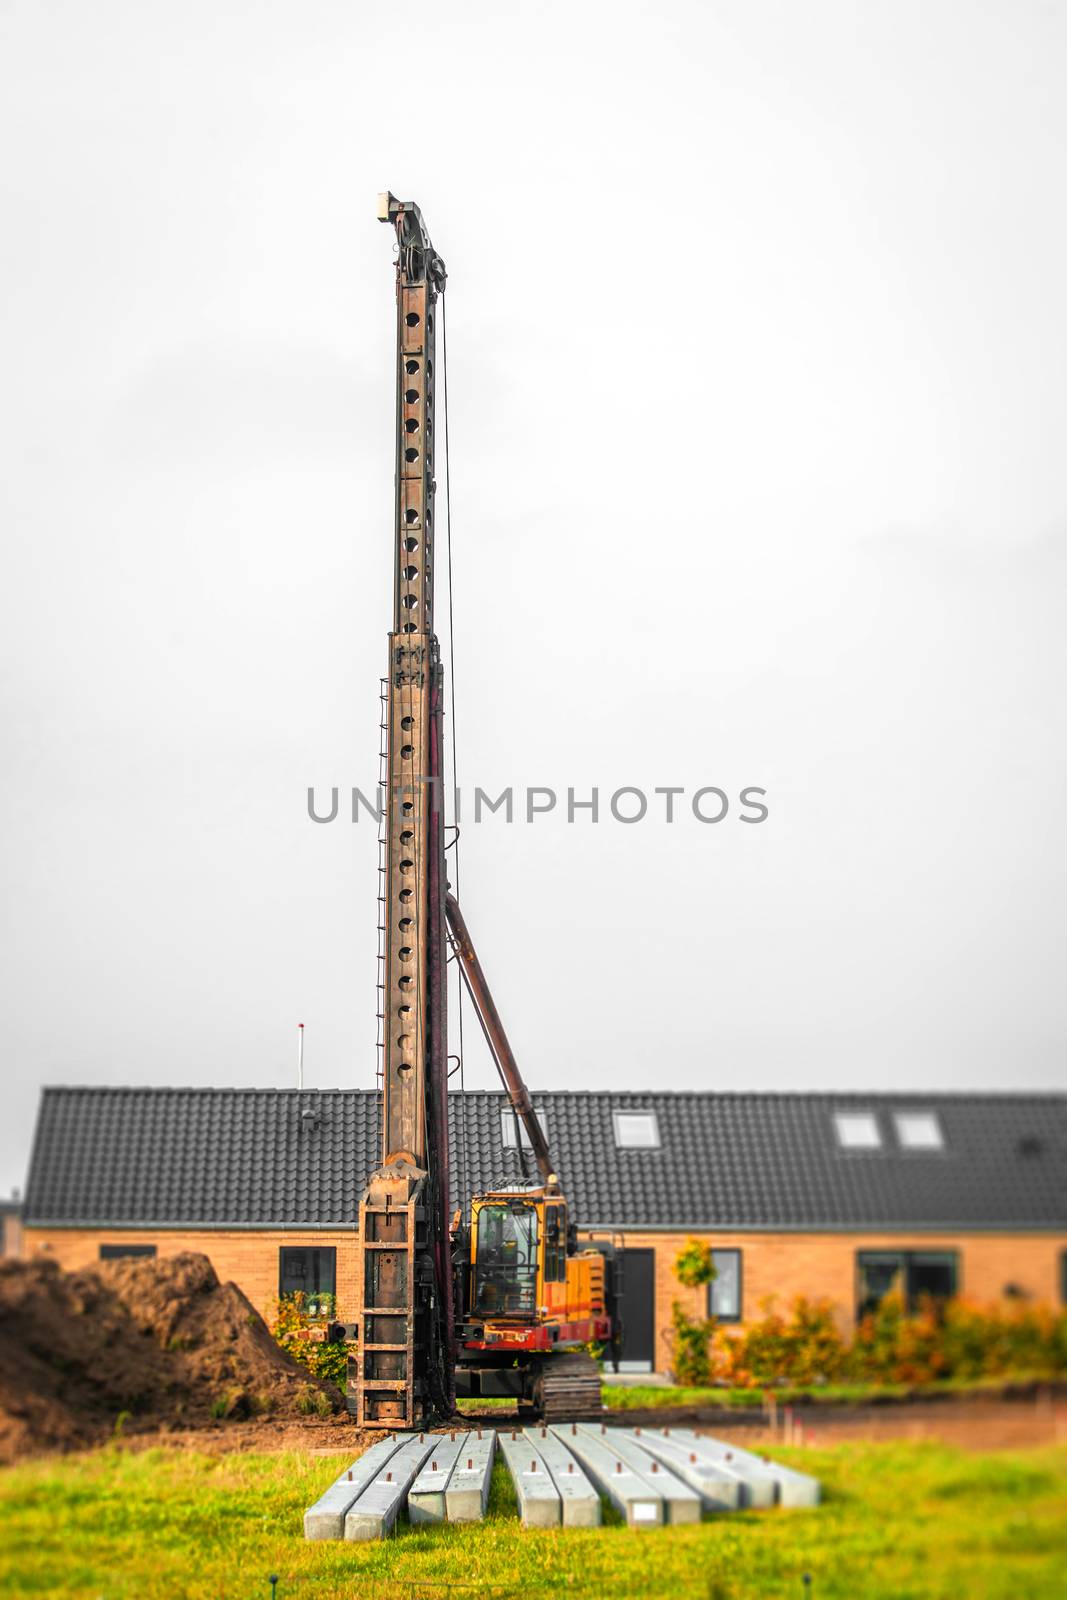 Piling machine in a single family neighborhood by Sportactive